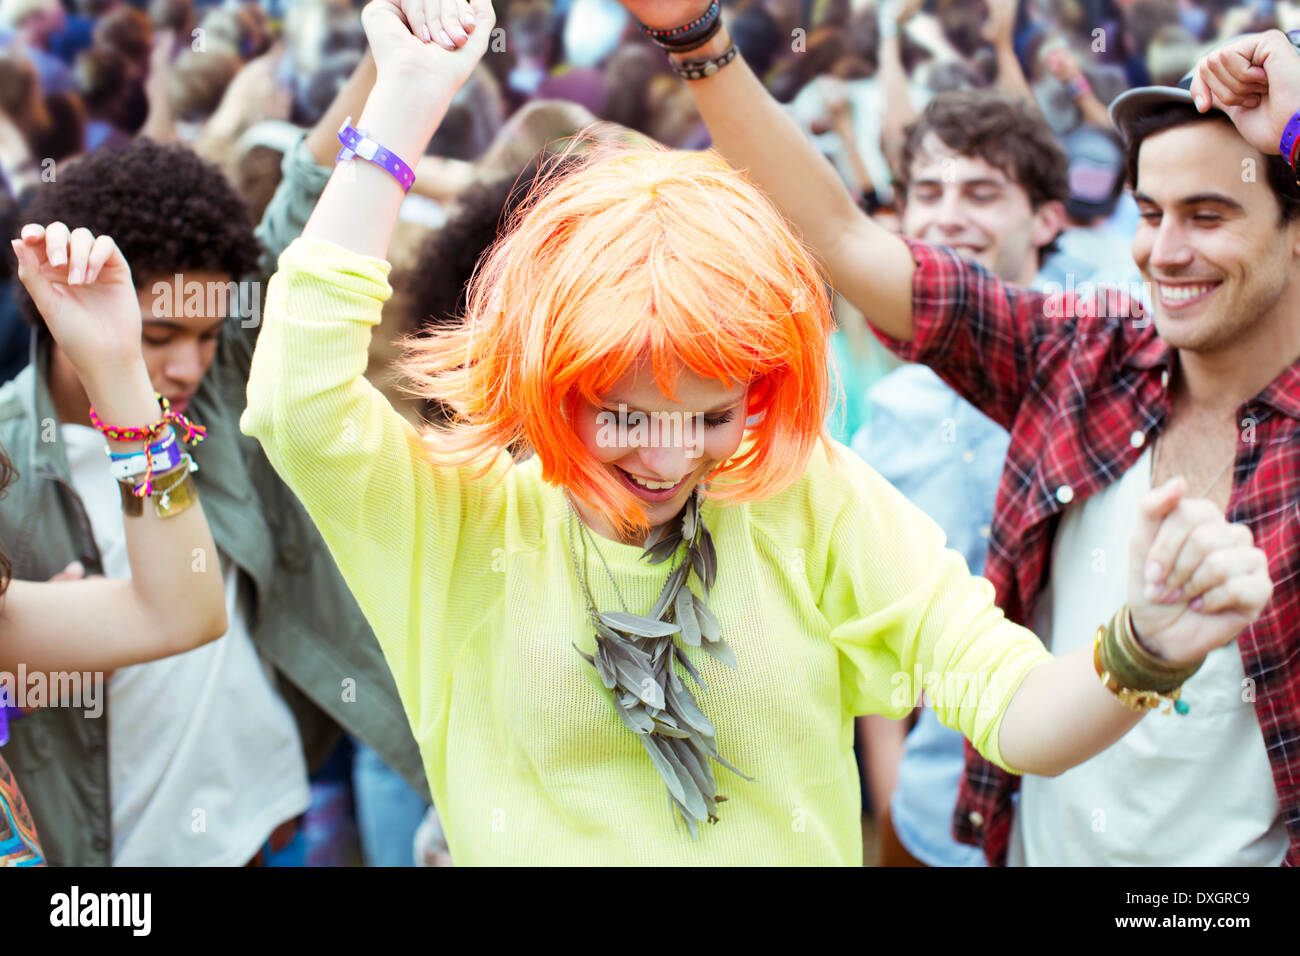 Woman in wig dancing at music festival Stock Photo